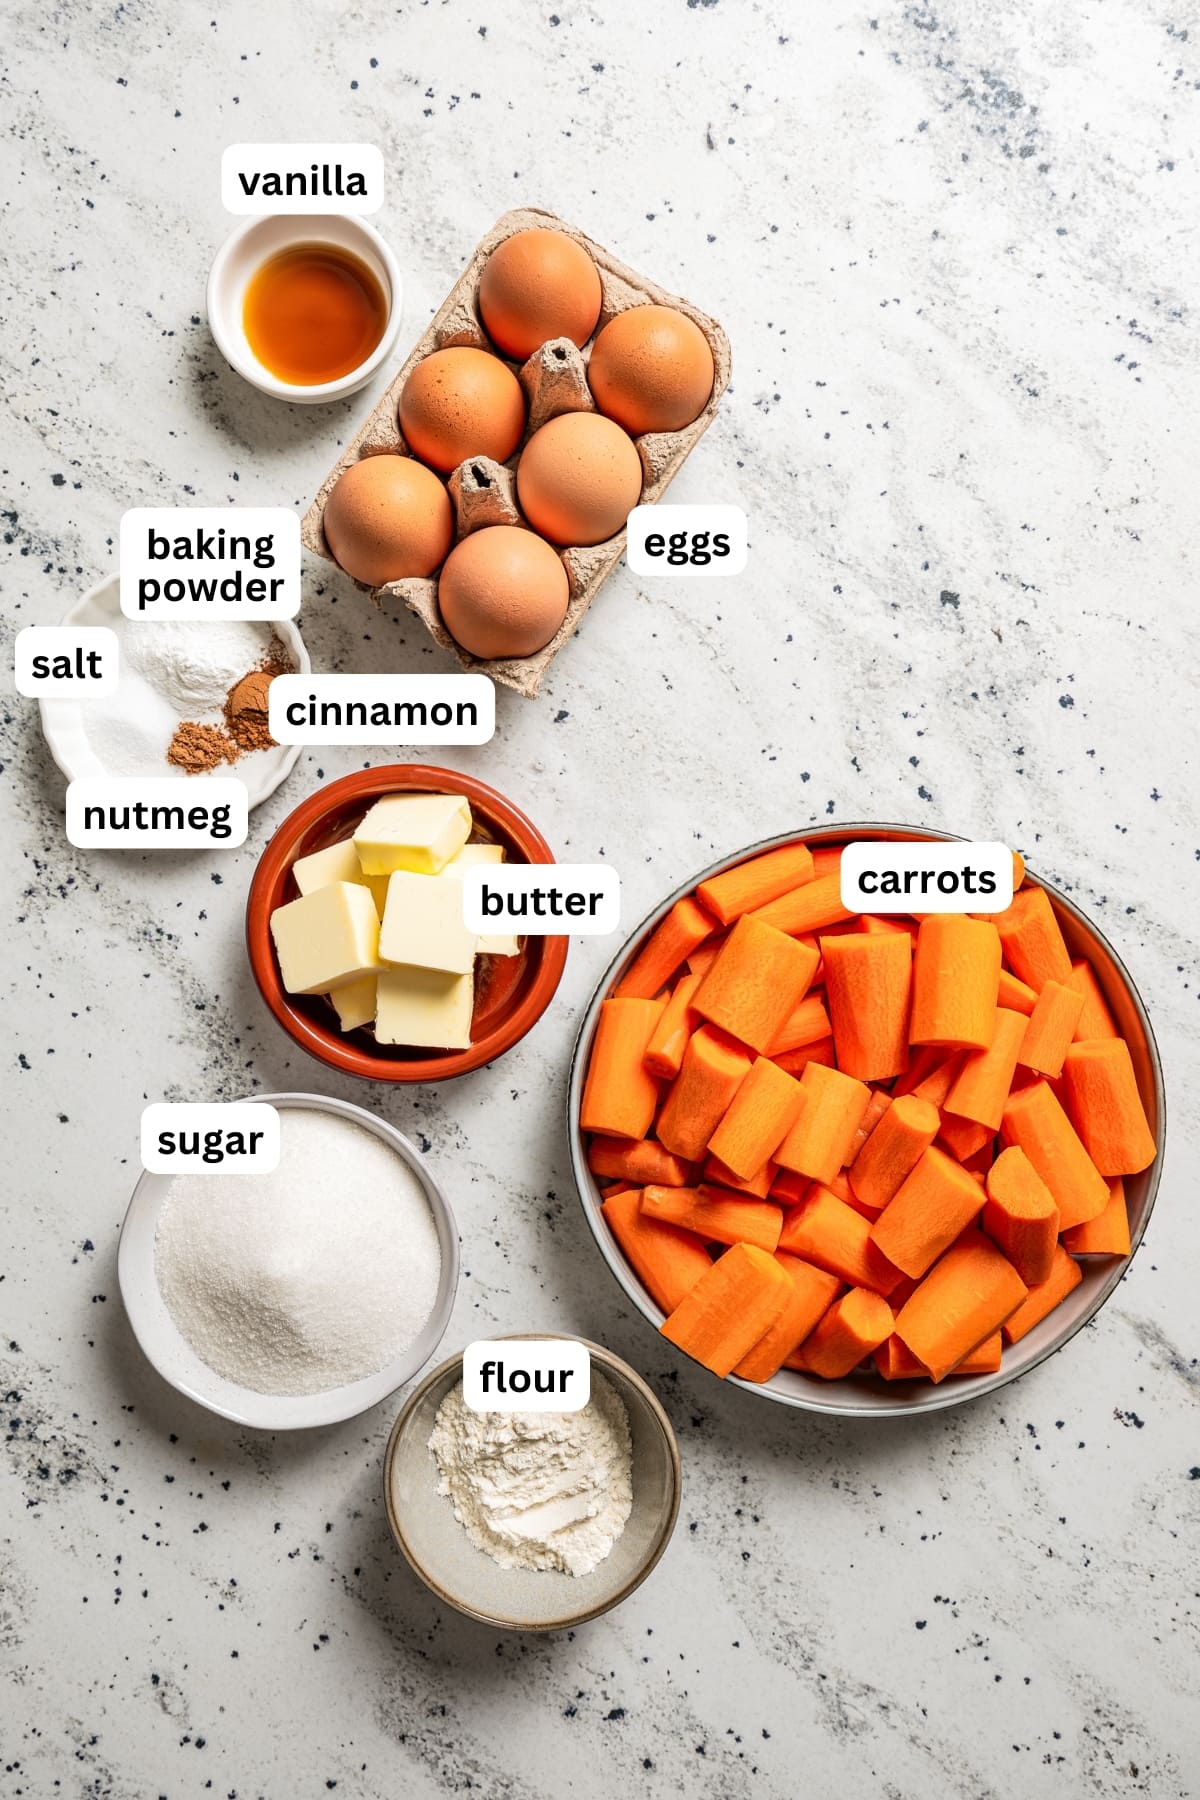 Aerial view of all the ingredients used to make Carrot Souffle.